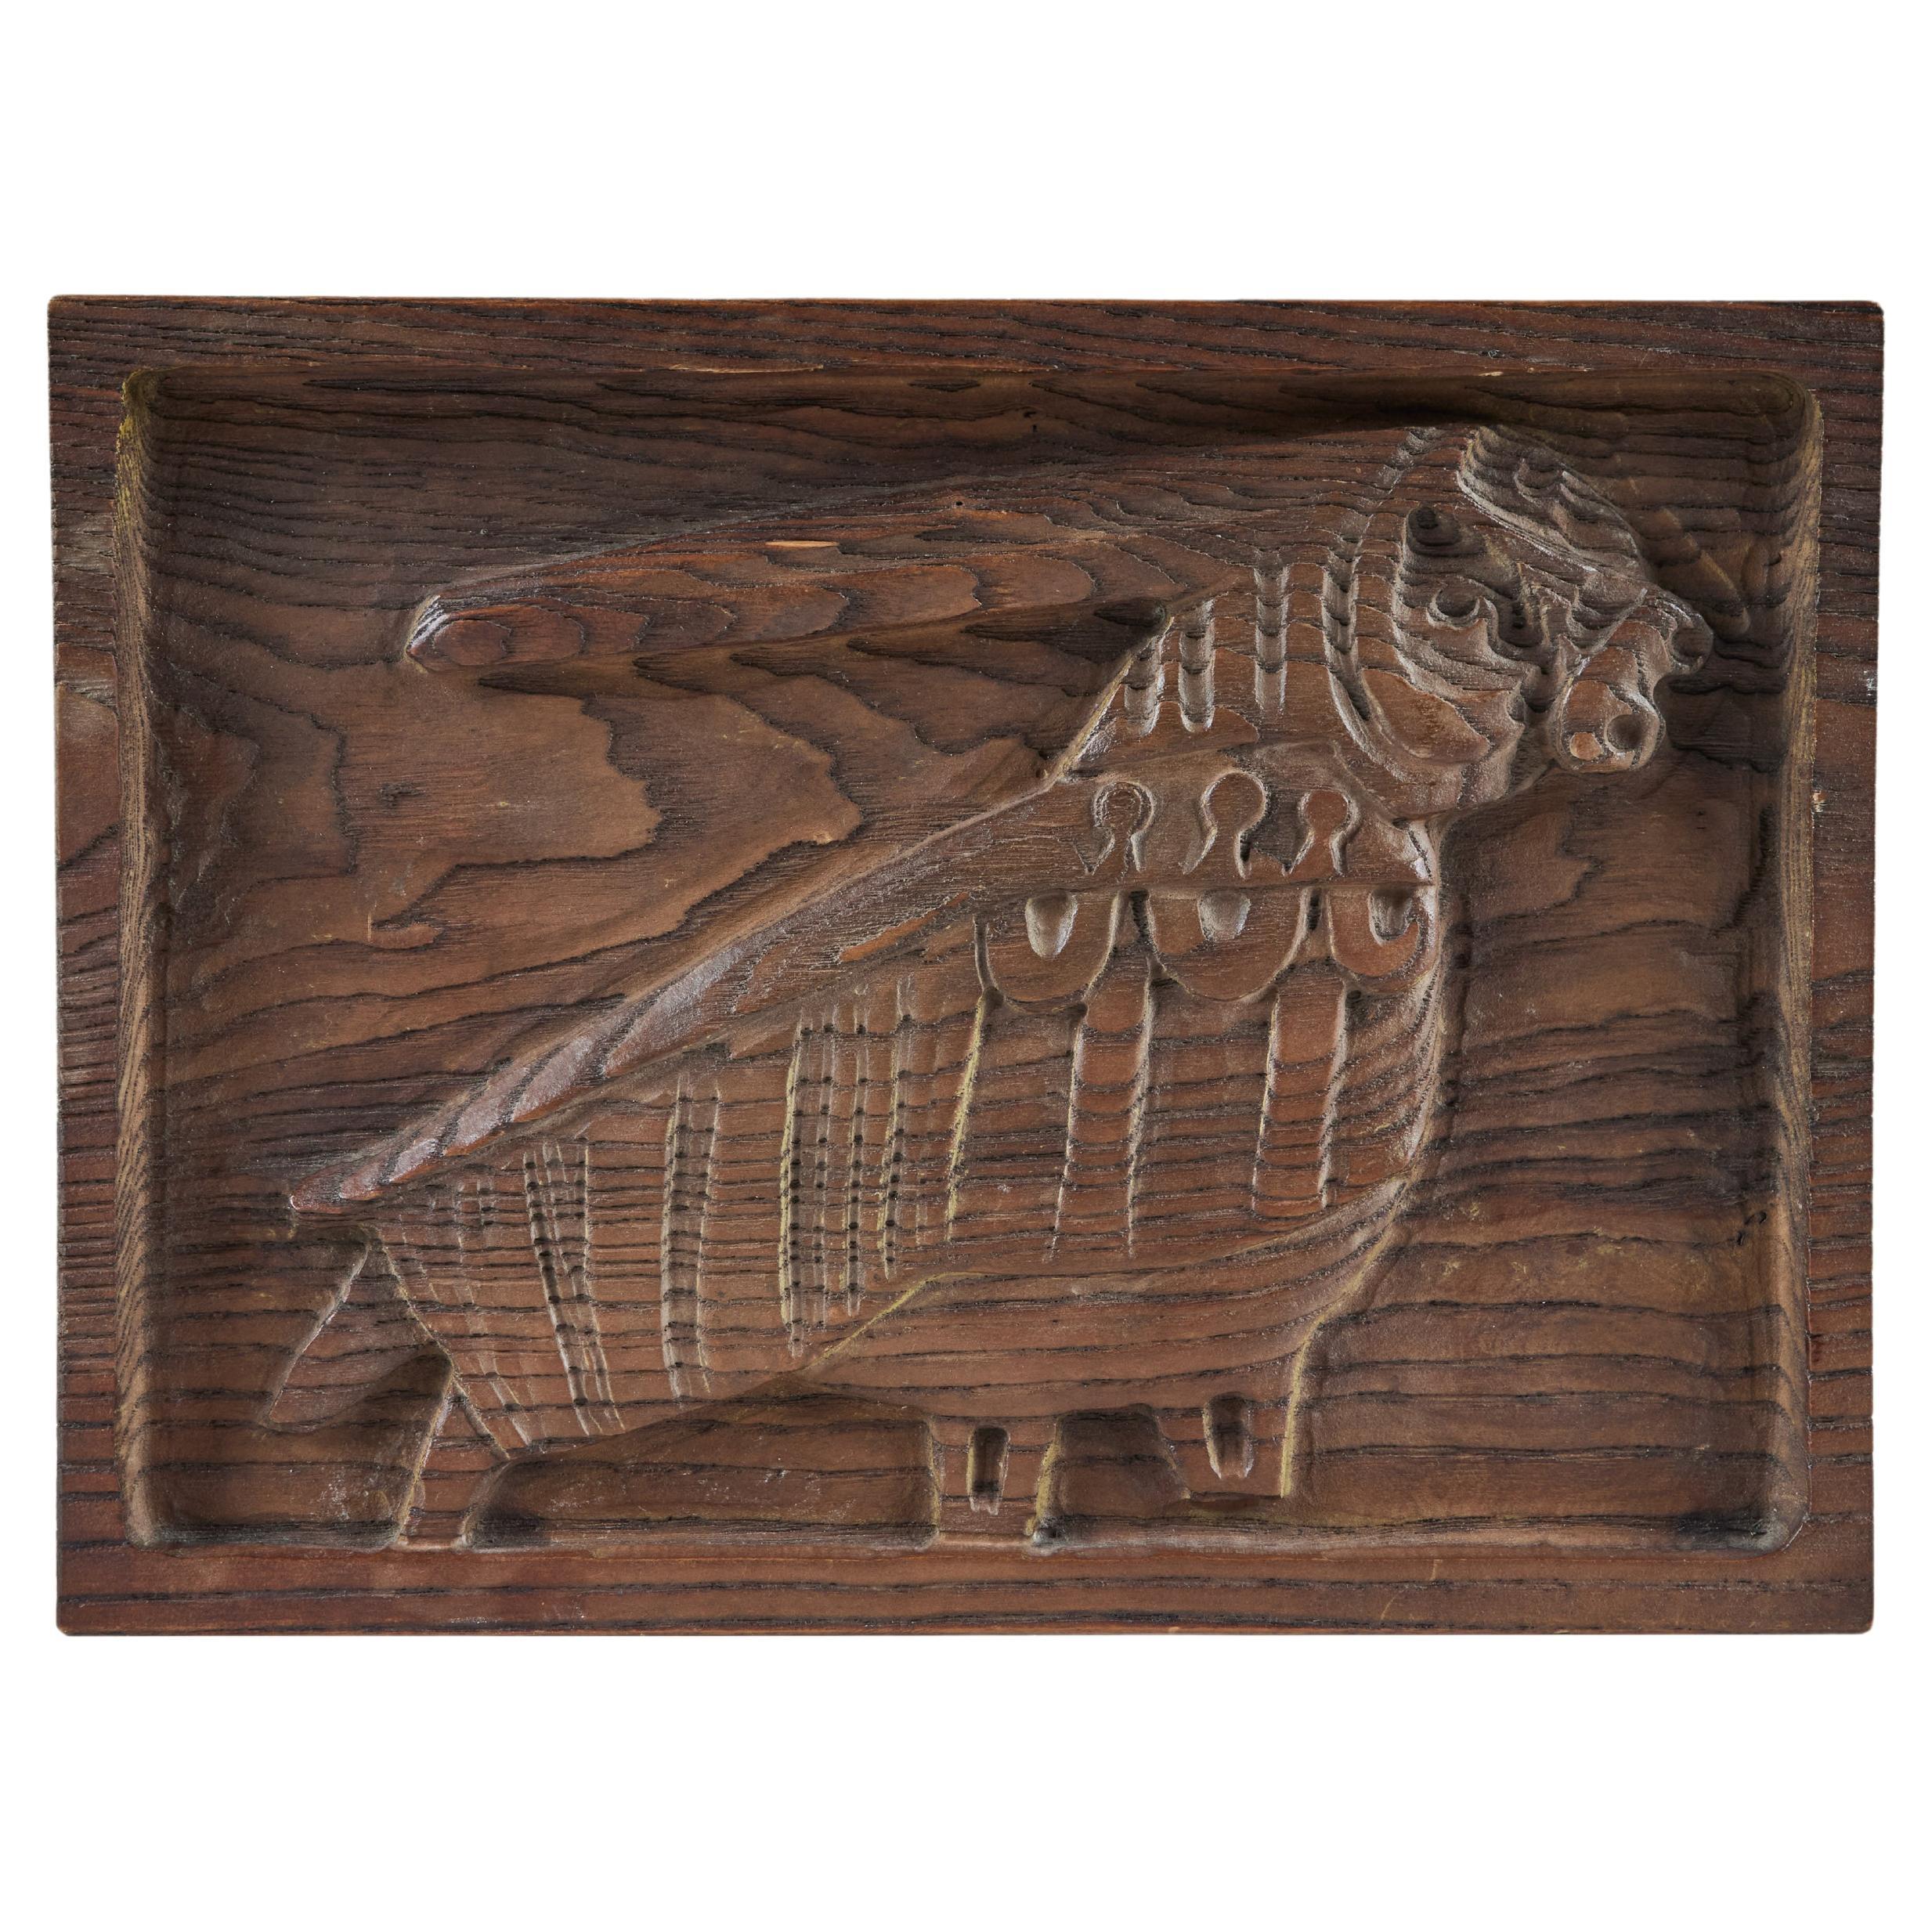 Evelyn Ackerman Animal Wood Carved Panel For Sale